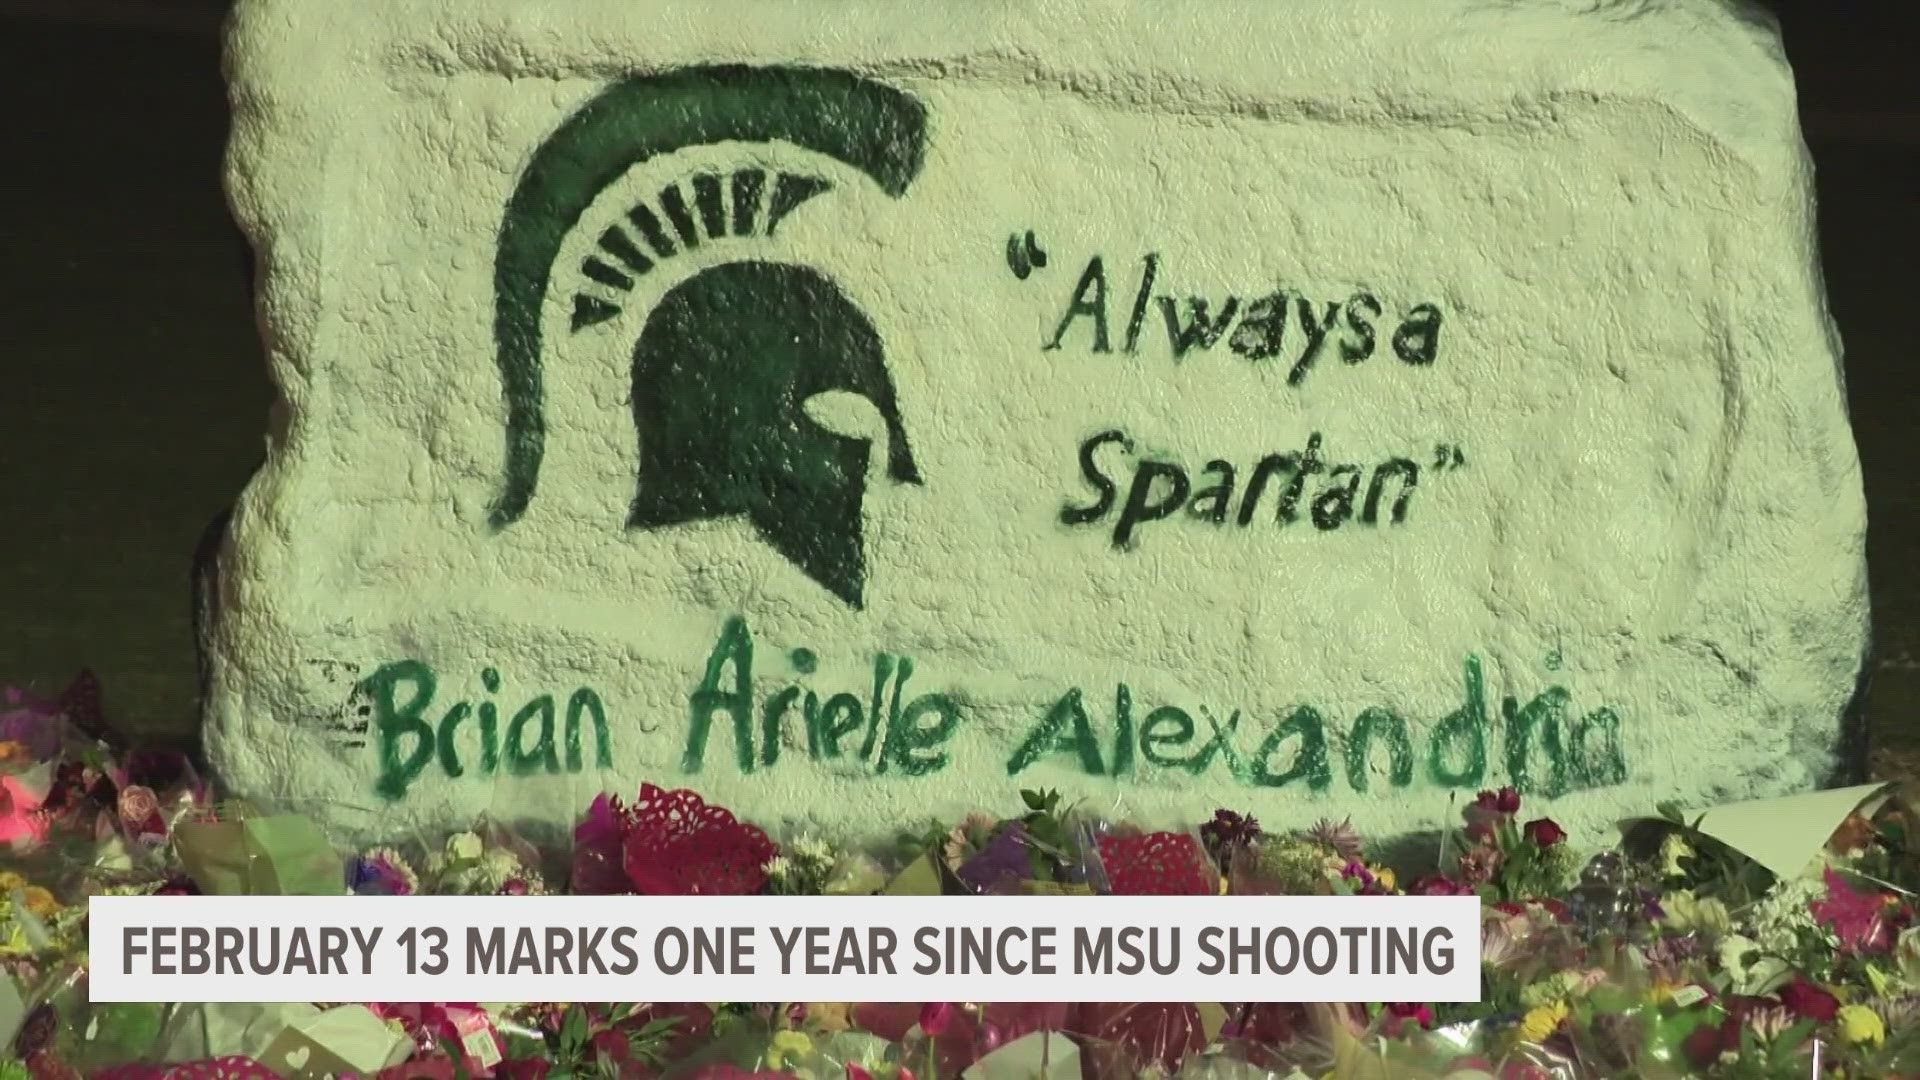 February 13 will mark one year since the mass shooting at Michigan State University.